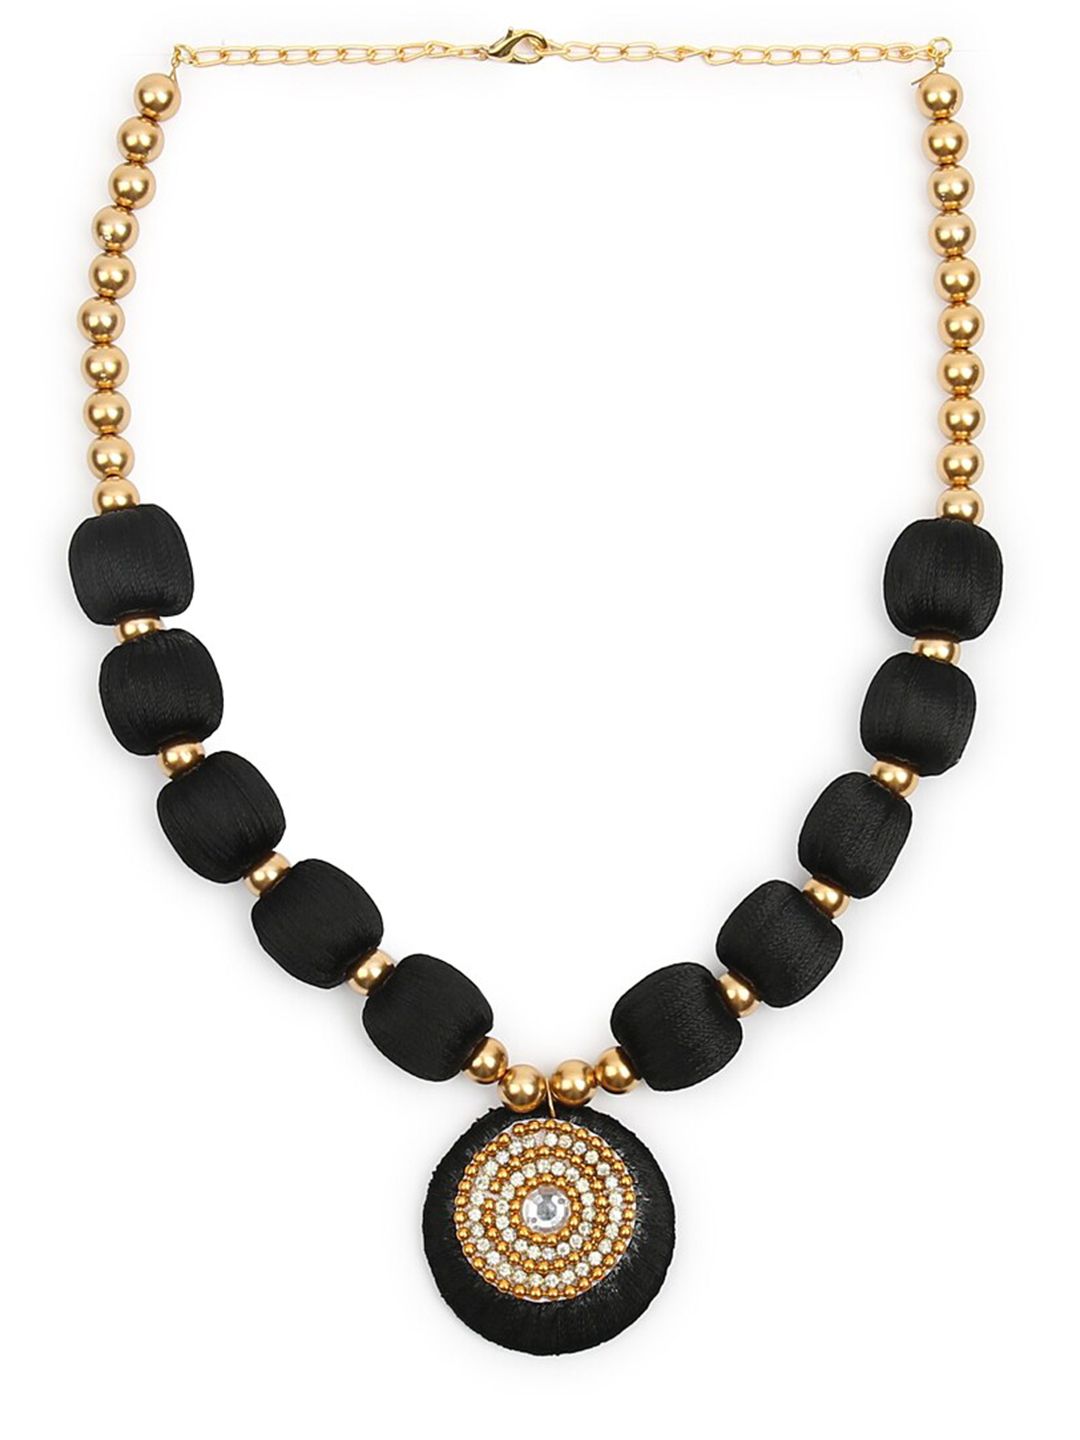 AKSHARA Black & Gold-Toned Choker Necklace Price in India